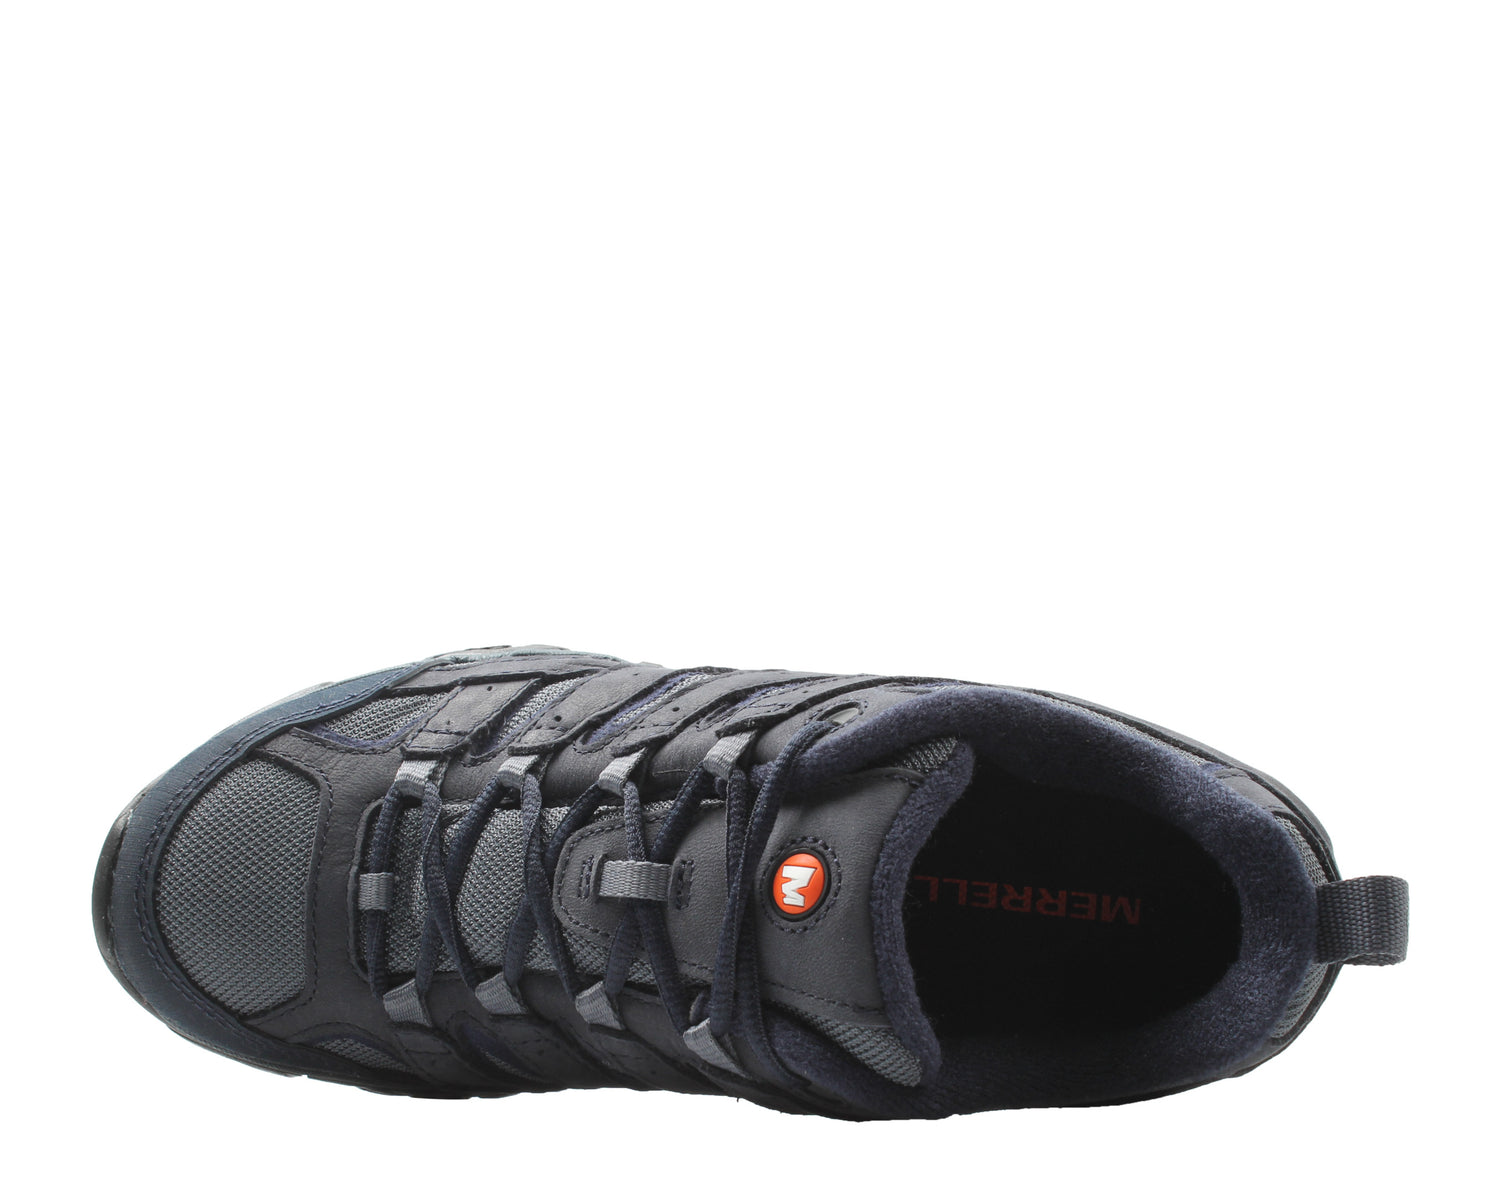 Merrell Moab 2 Smooth Men's Hiking Shoes